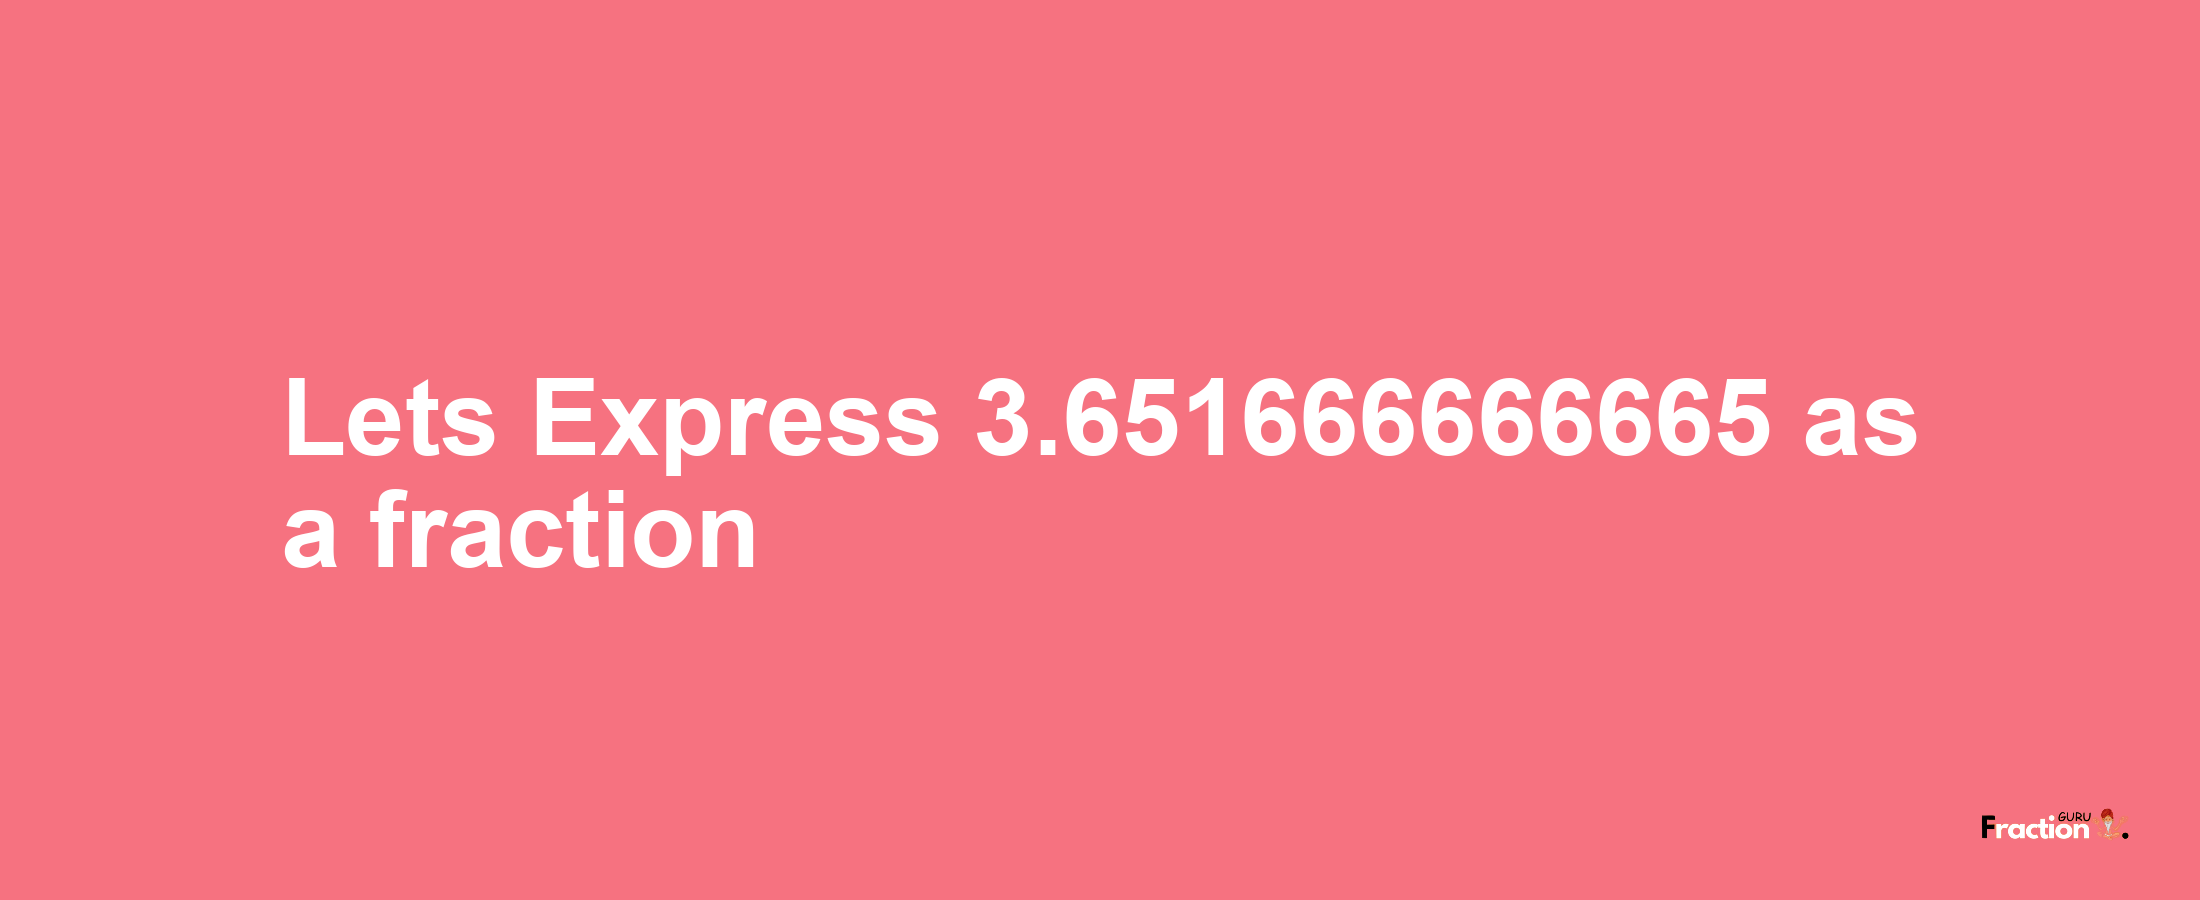 Lets Express 3.651666666665 as afraction